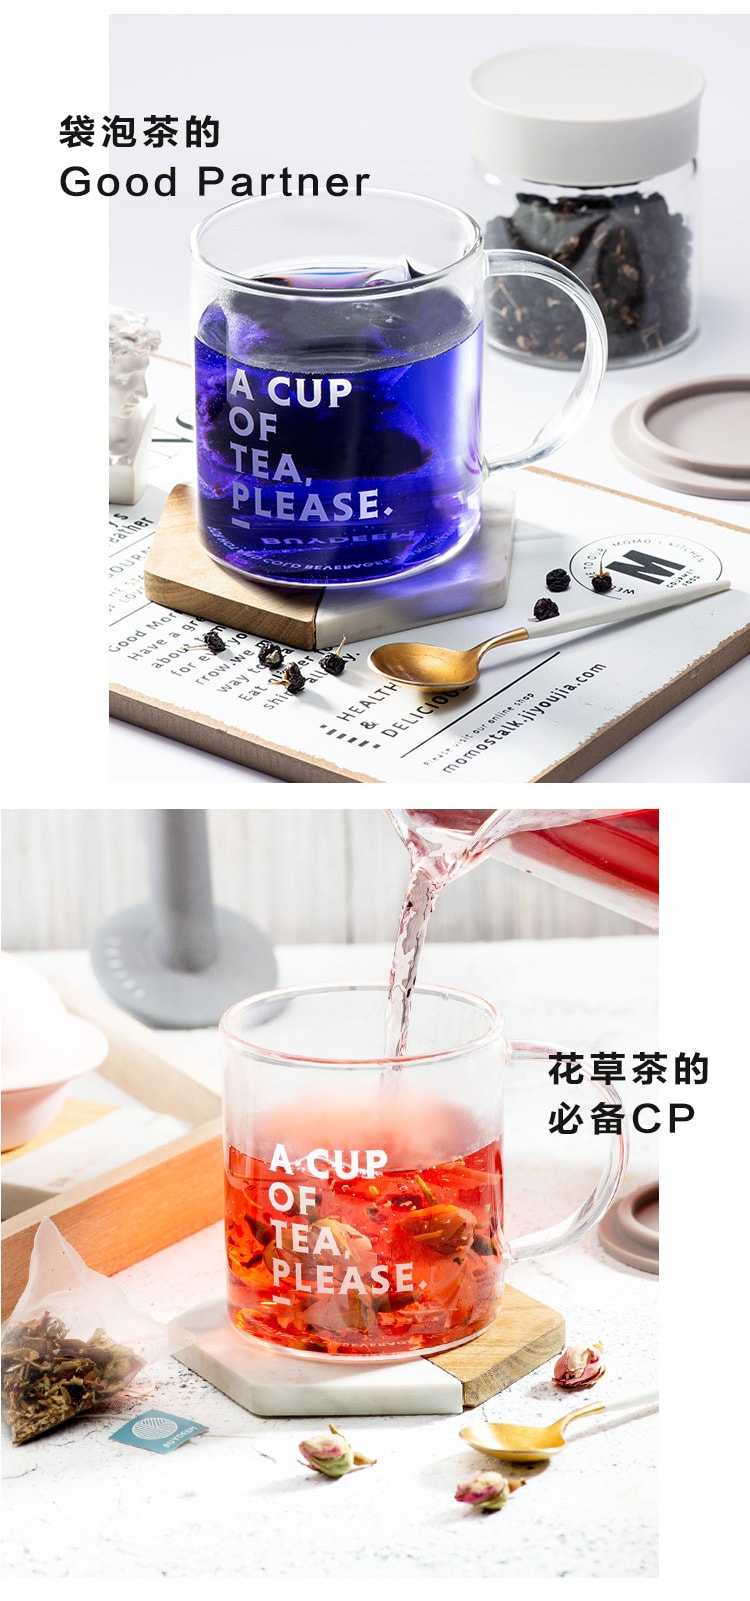 Health-Care Beverage maker set K2683 + tea cup + Dried Pear Slice and Fig soup 1pc each